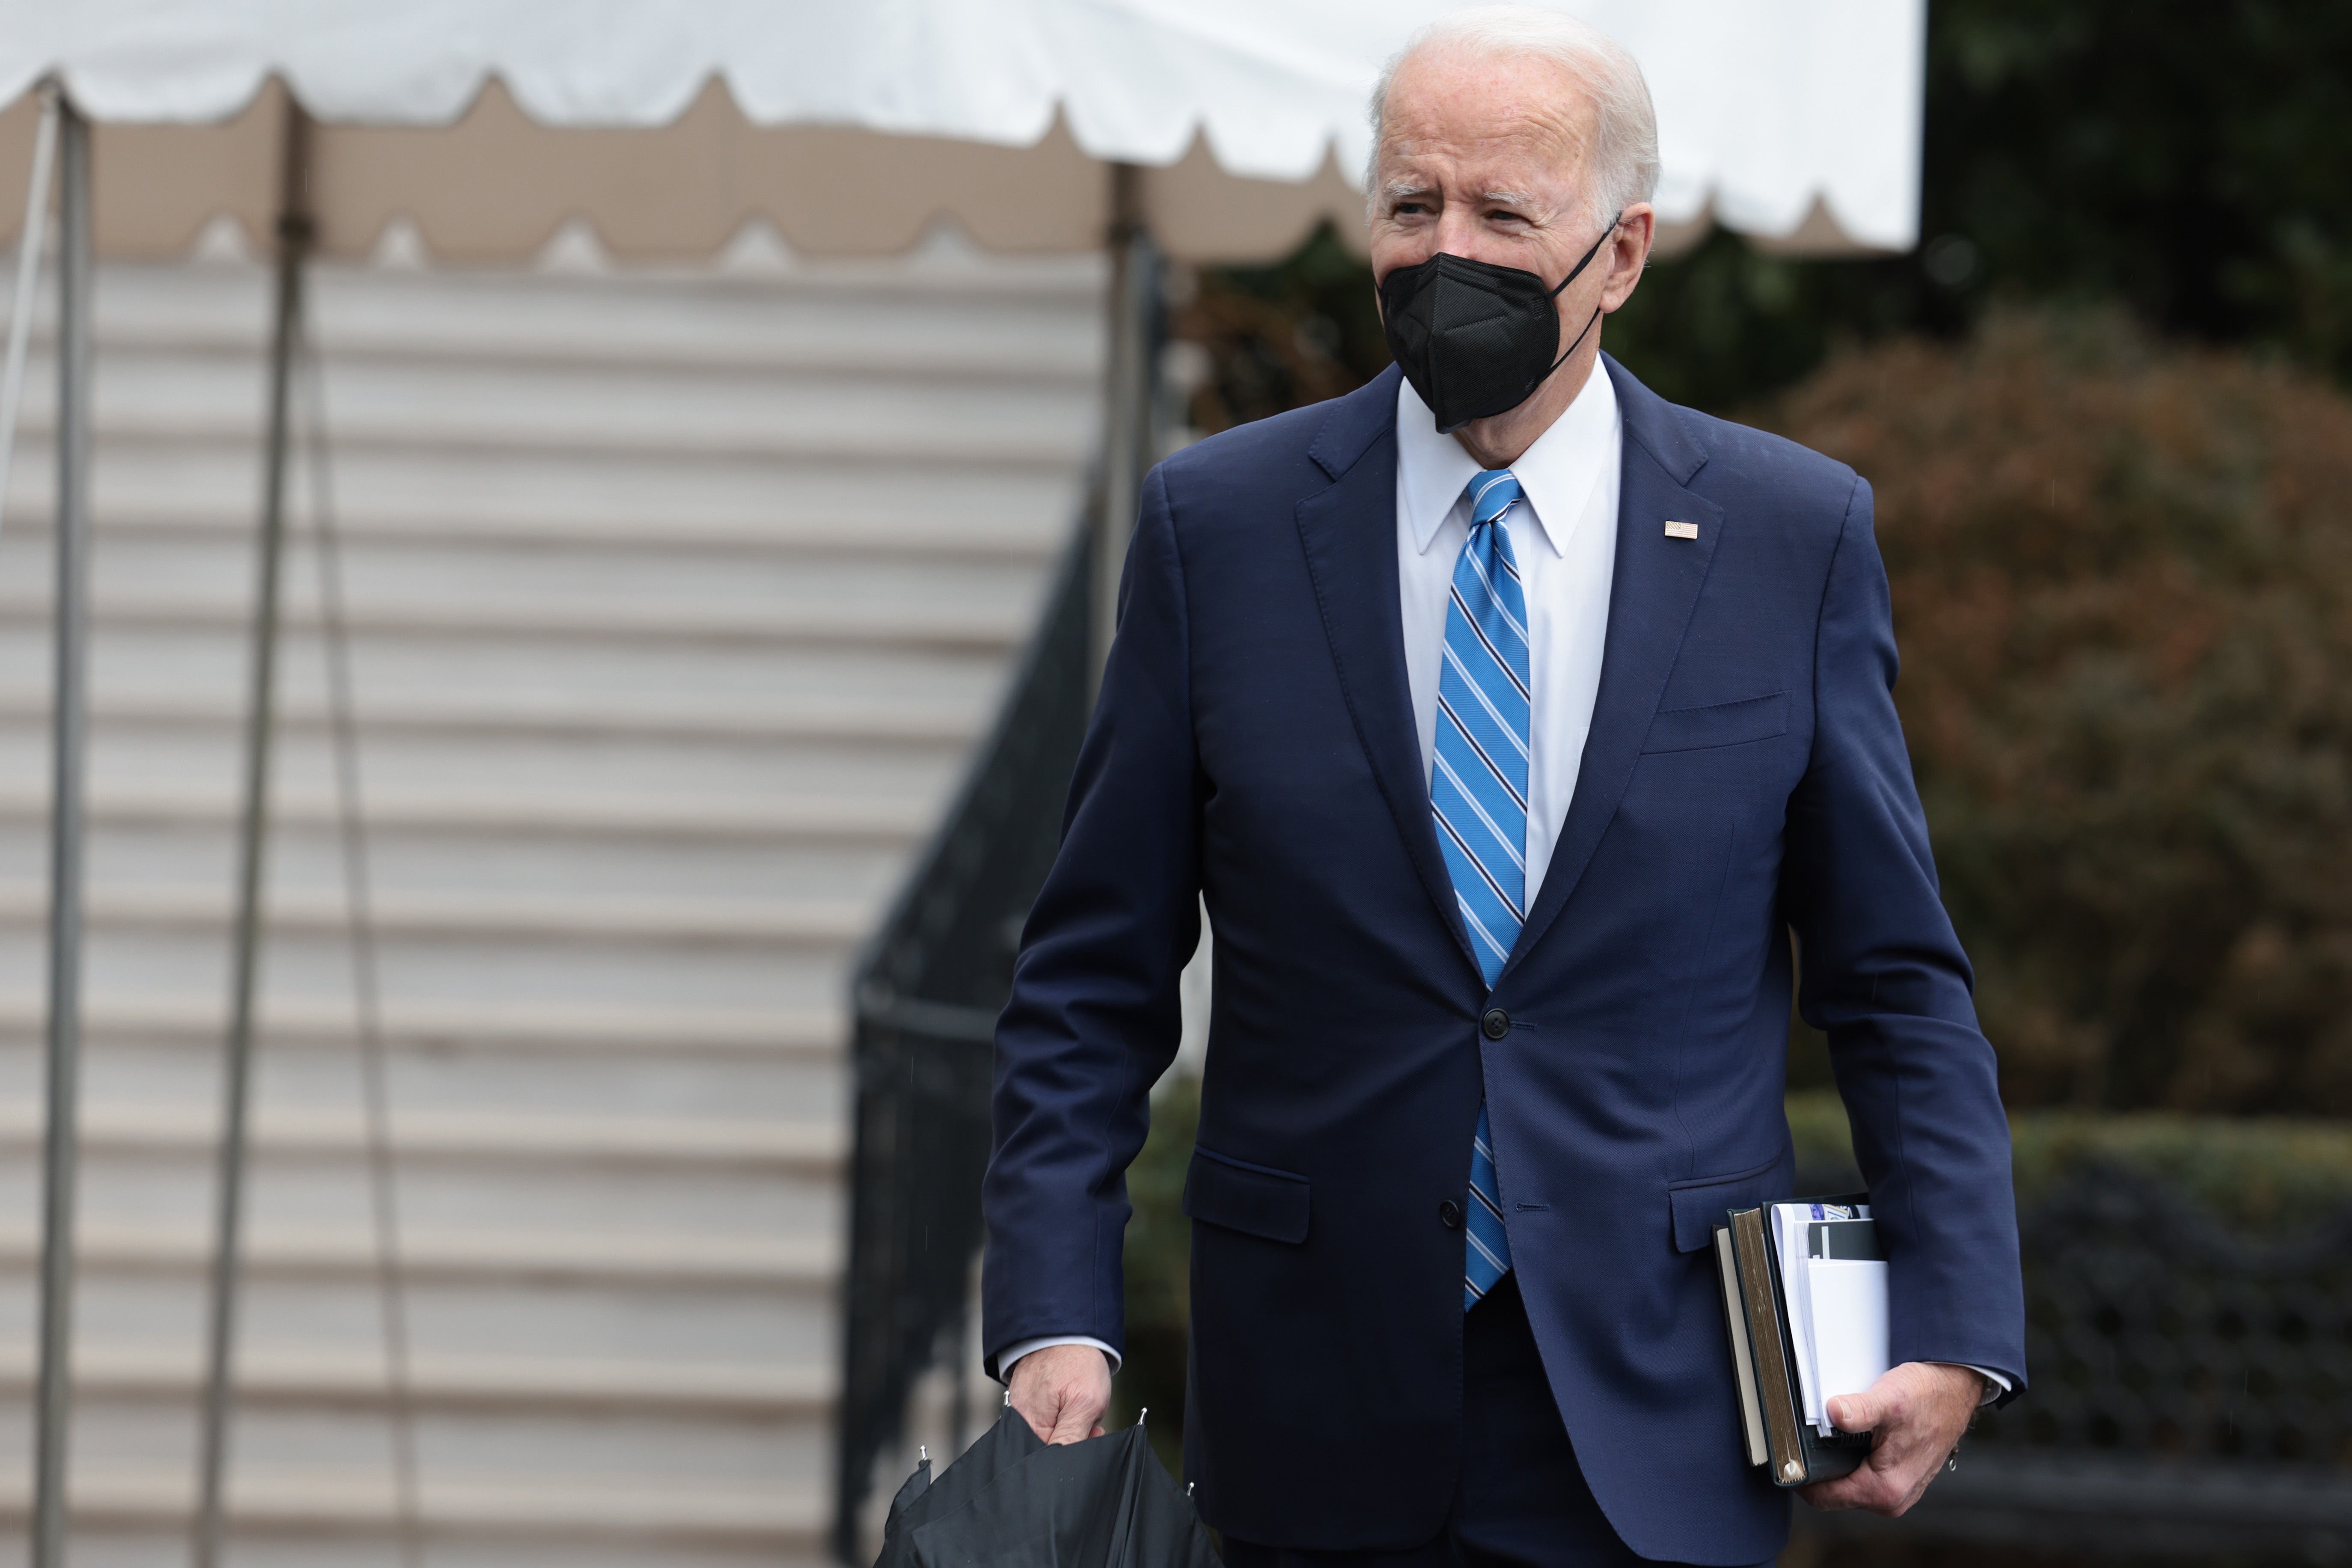 Biden's 'pandemic of the unvaccinated' narrative falls apart as omicron cases skyrocket